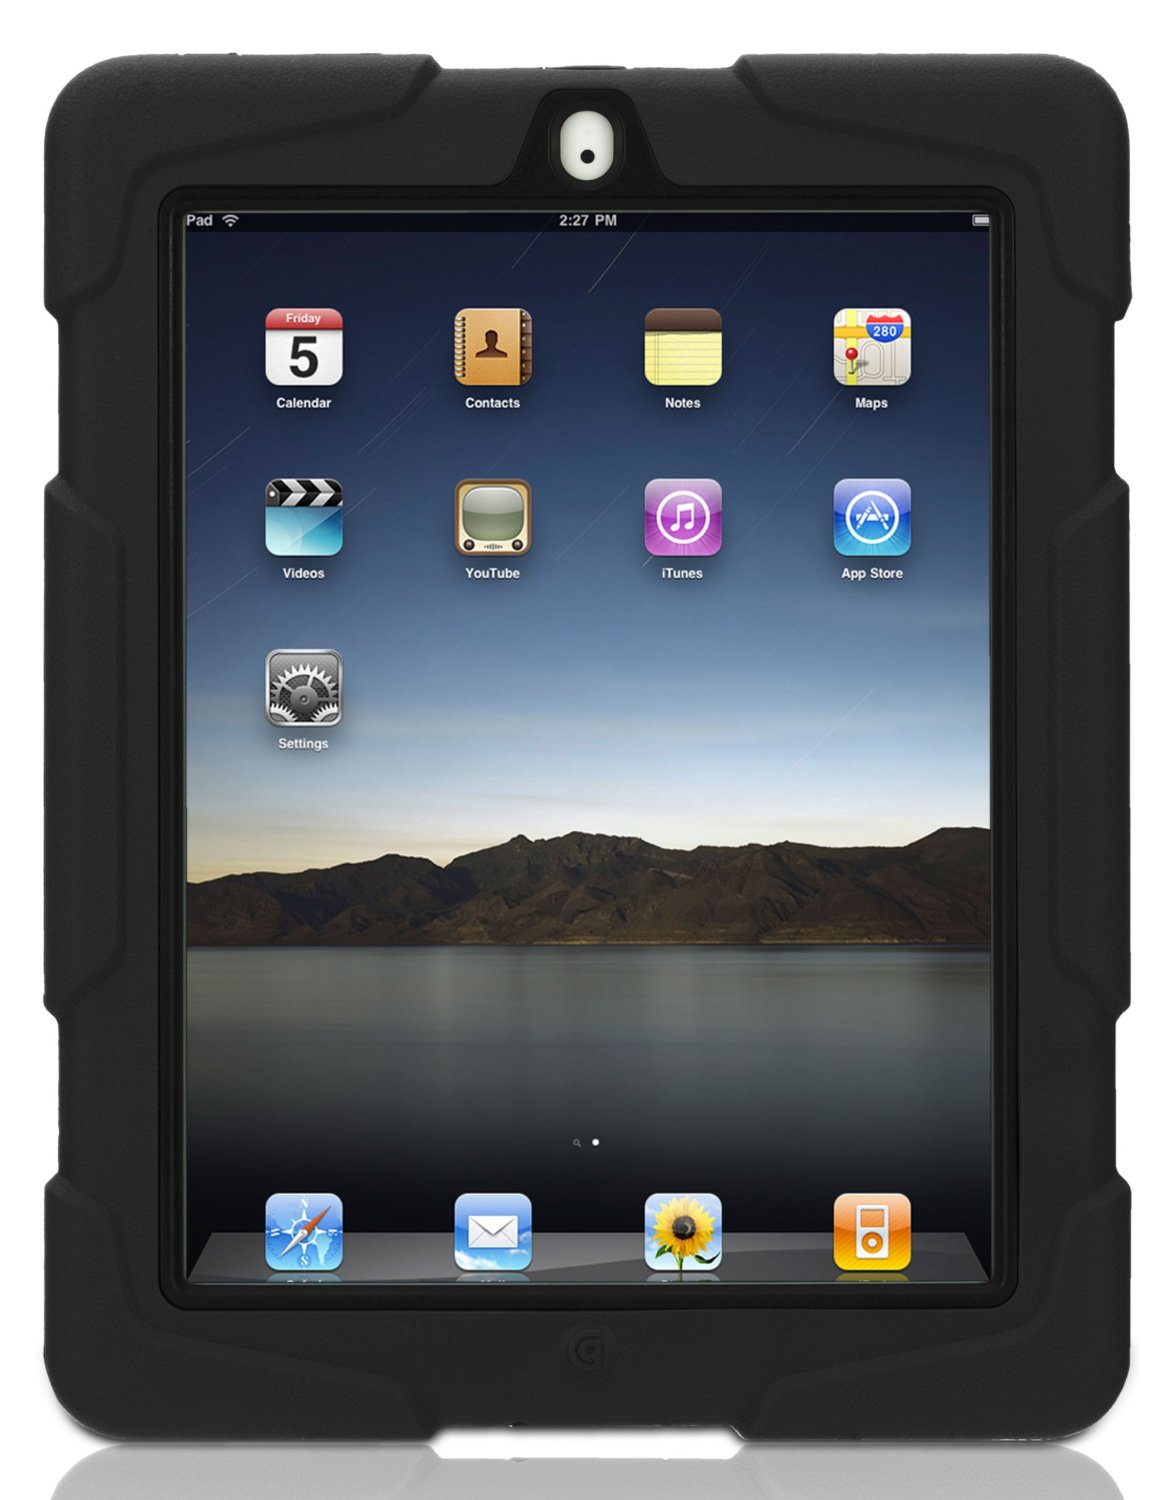 Griffin Survivor Extreme-duty Military case for the new iPad (4th Generation), iPad 3 and iPad 2, Negro,azul,rojo.